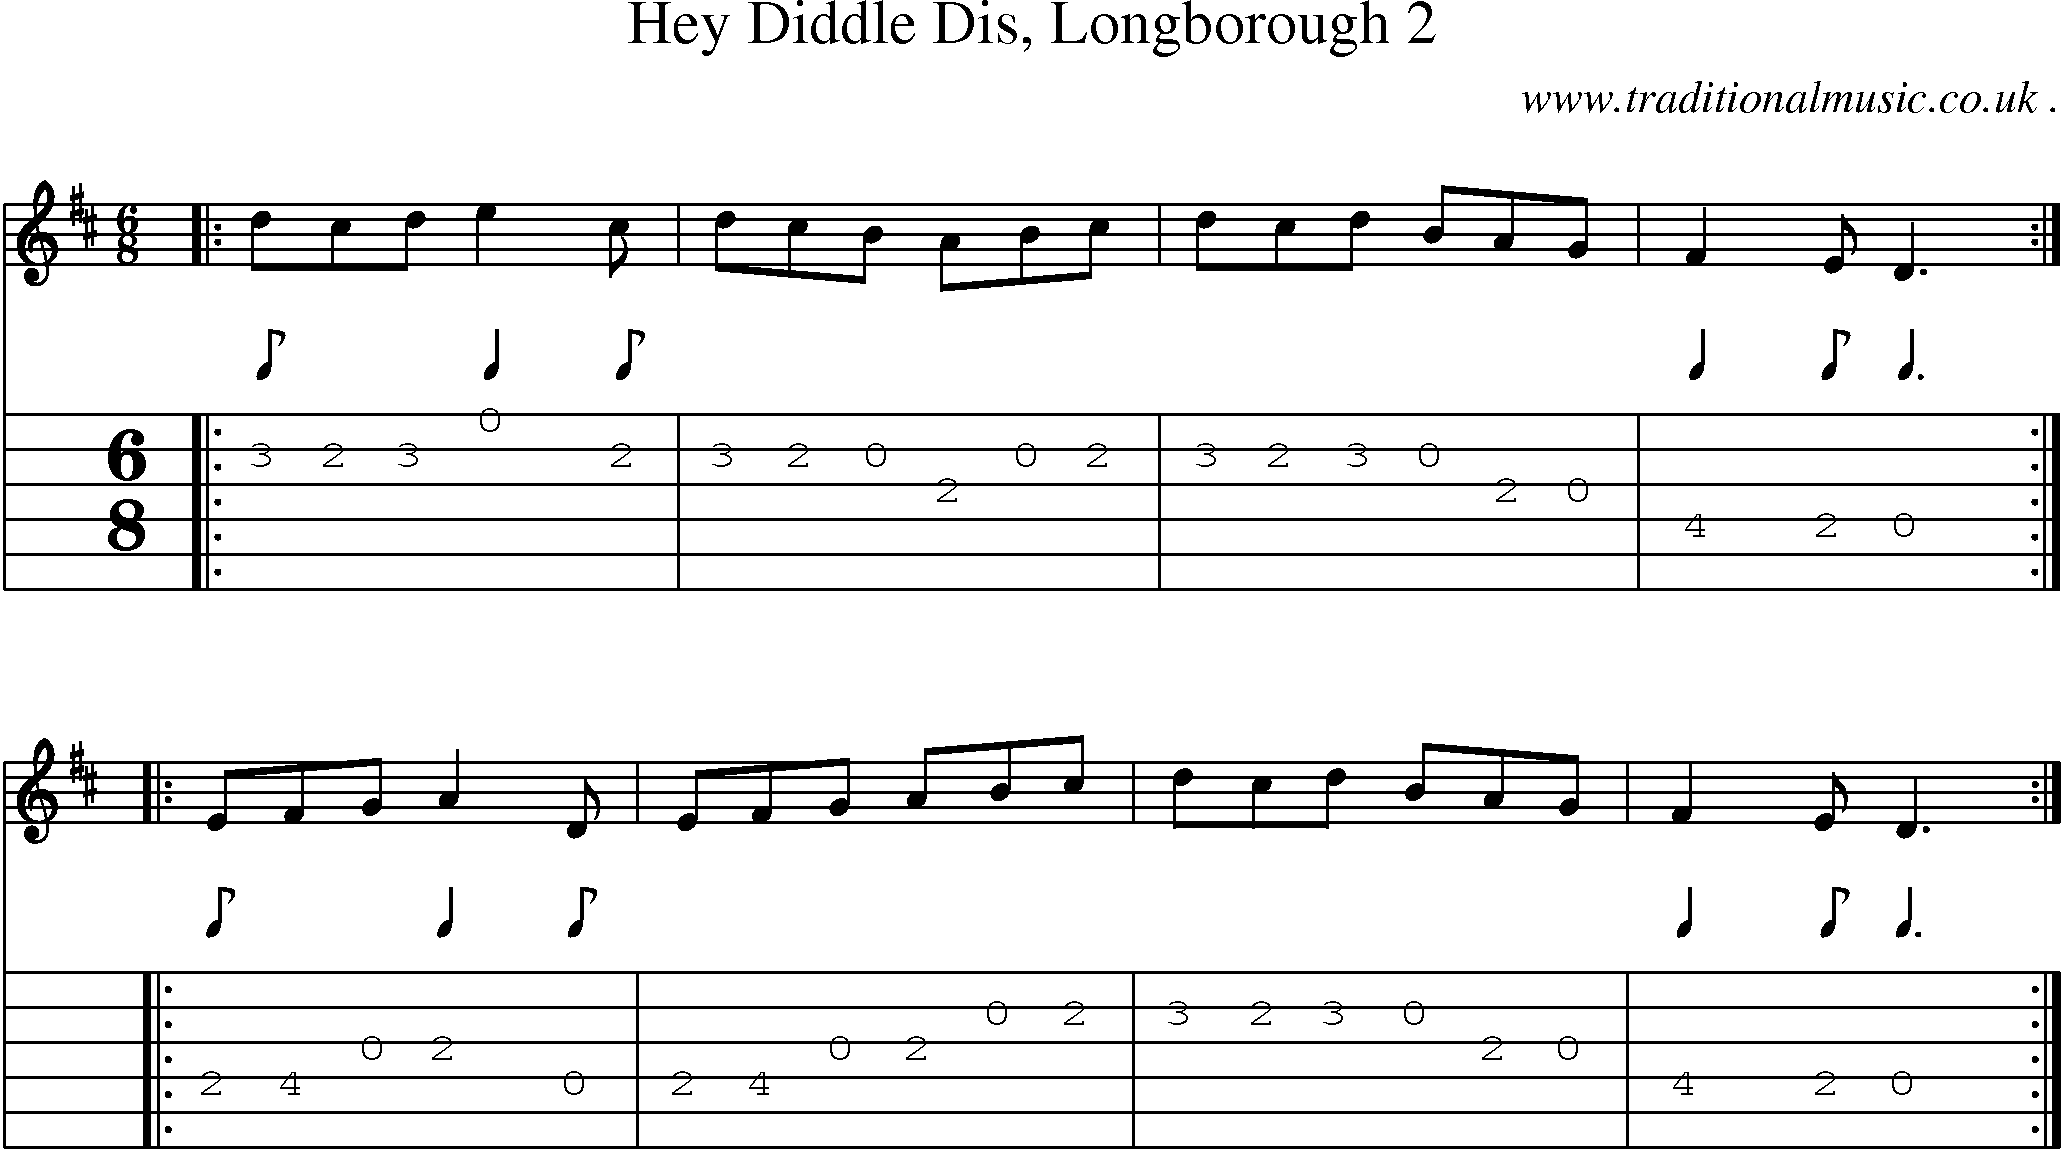 Sheet-Music and Guitar Tabs for Hey Diddle Dis Longborough 2